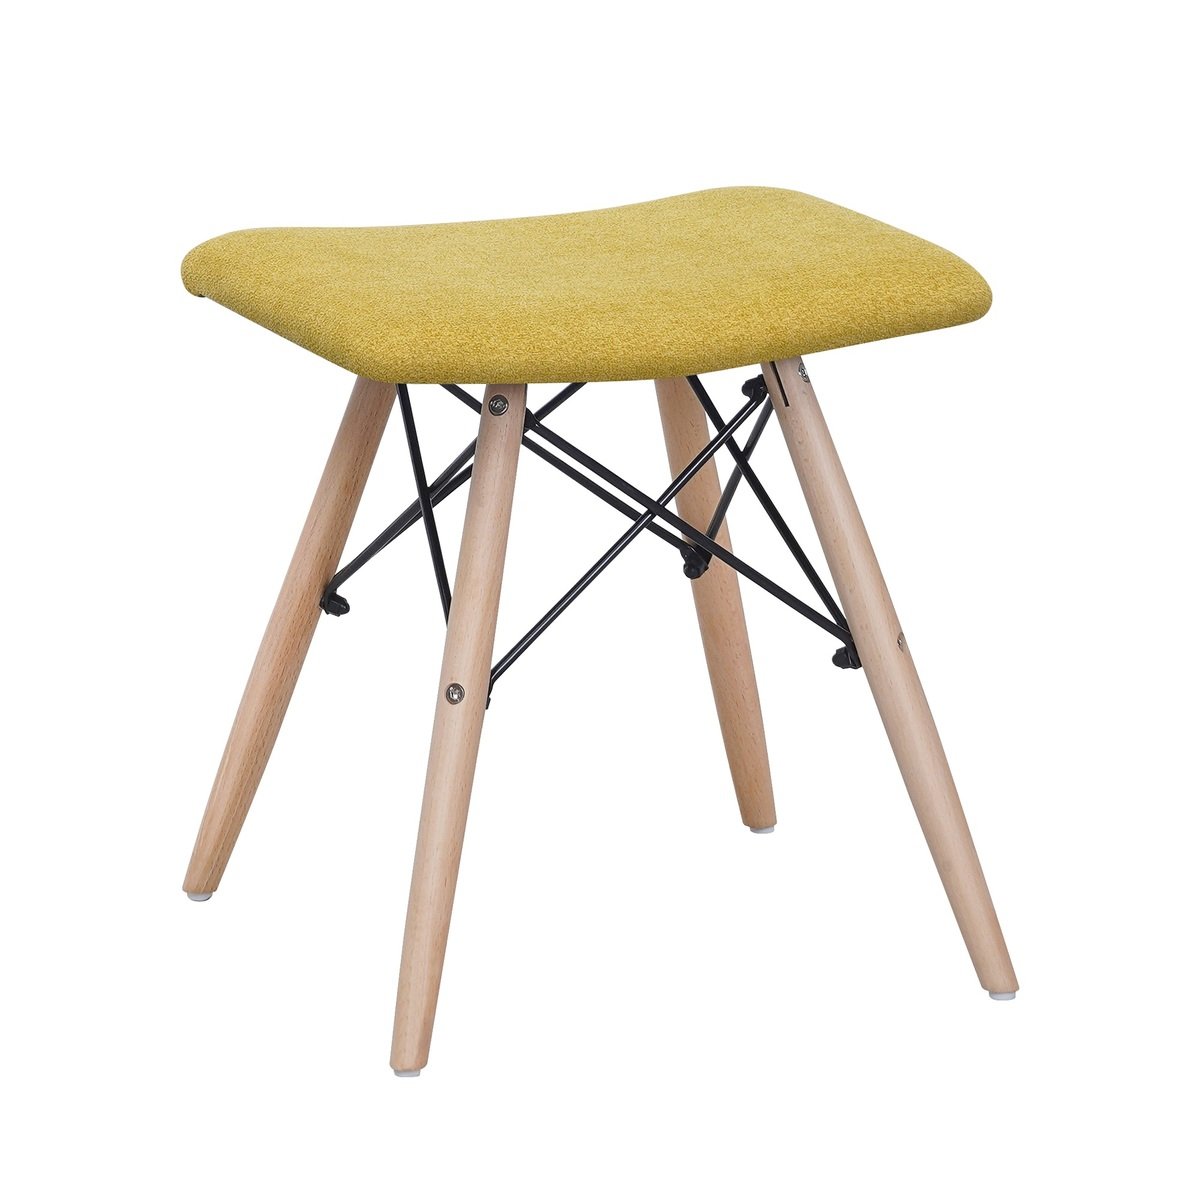 Maple Leaf Home Wooden Stool 32x42x44cm Yellow